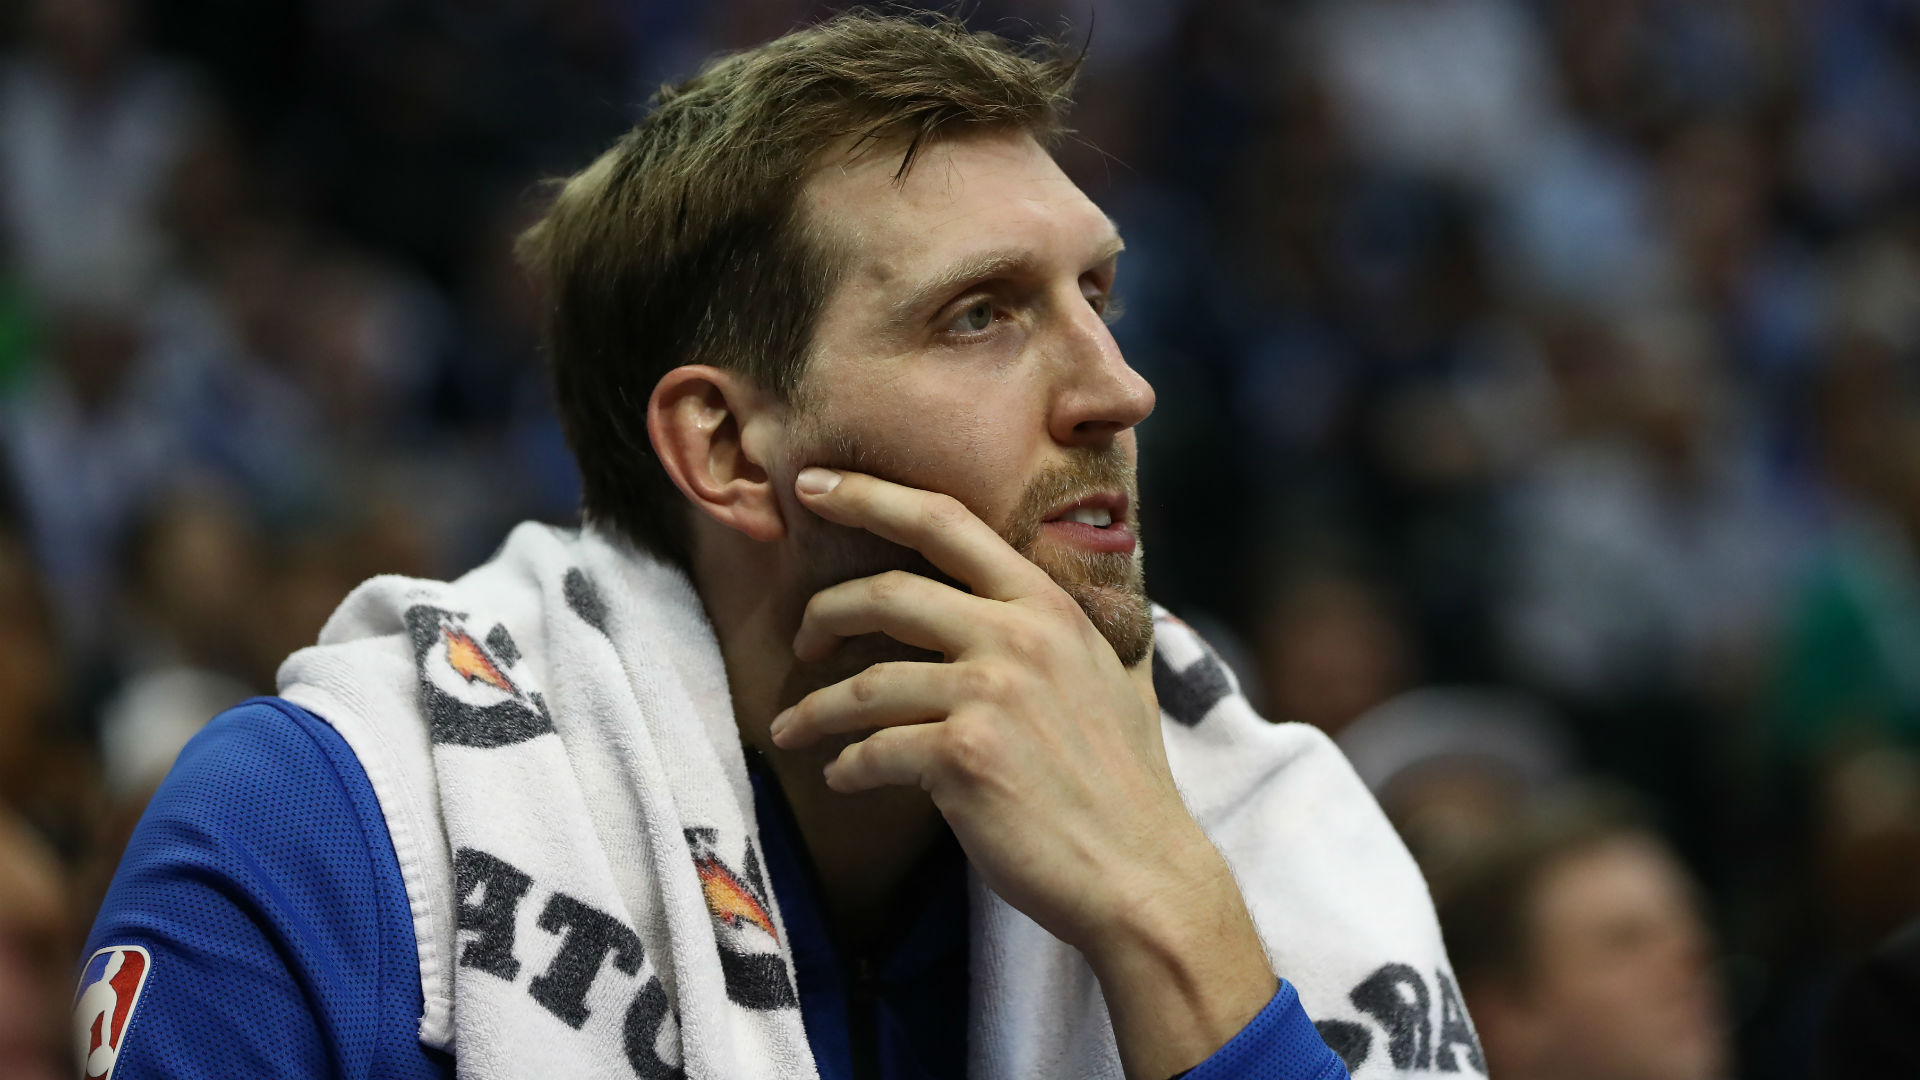 Ahead of the FIBA Basketball World Cup in China, Dirk Nowitzki has become the third big-name ambassador for the tournament.